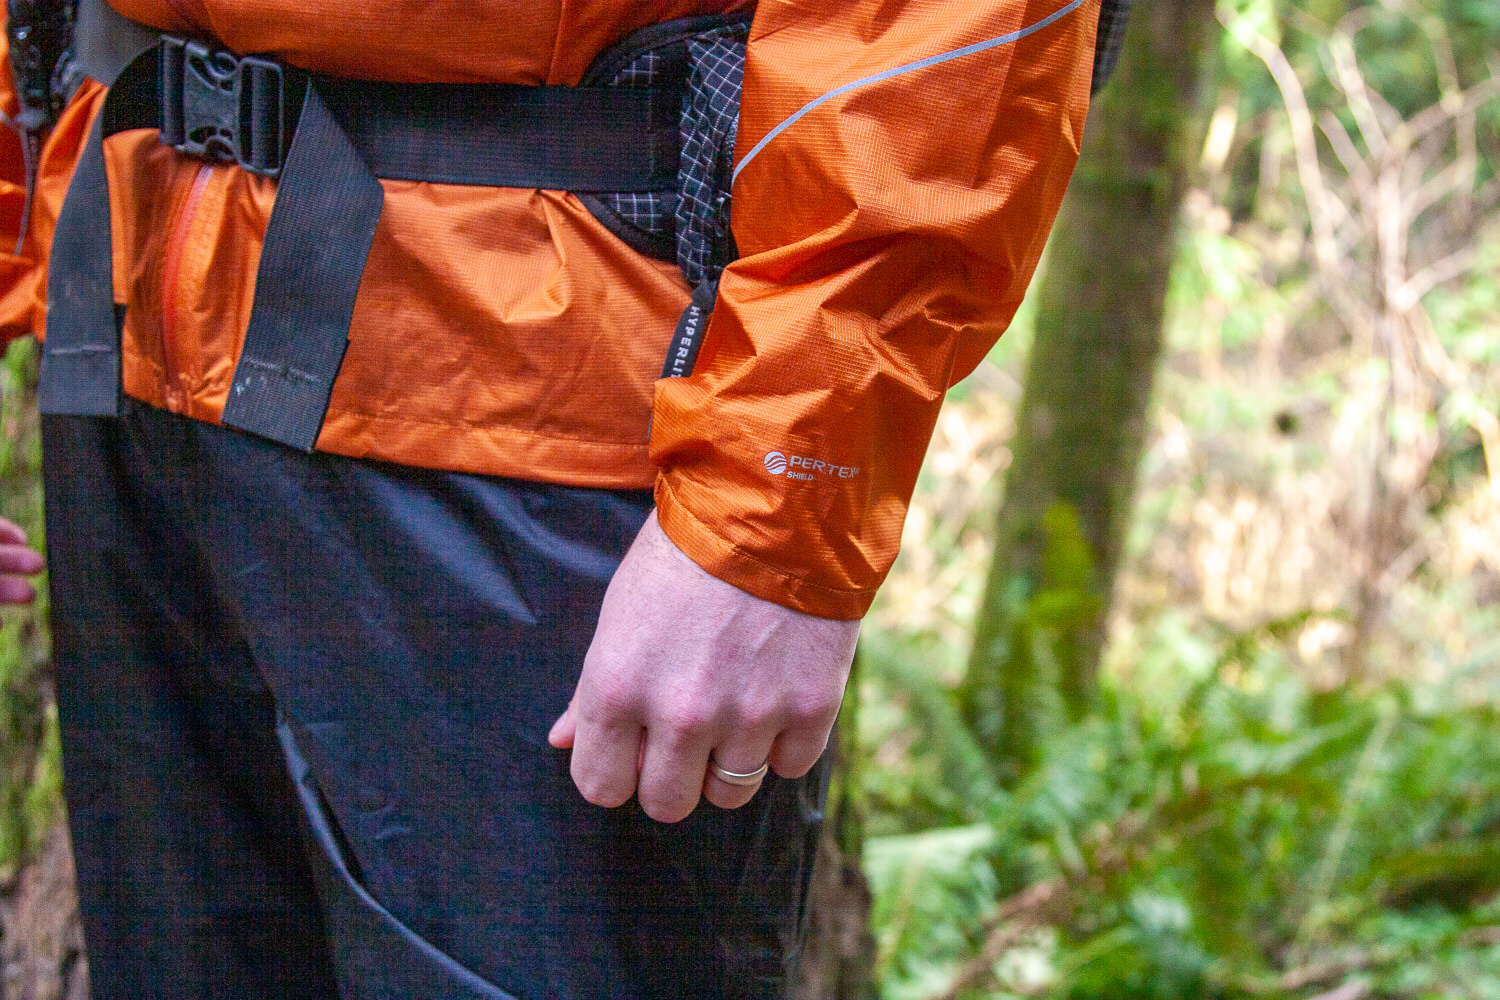 Since the Helium jacket doesn’t have hand pockets, it’s a good idea to bring waterproof gloves or rain mitts